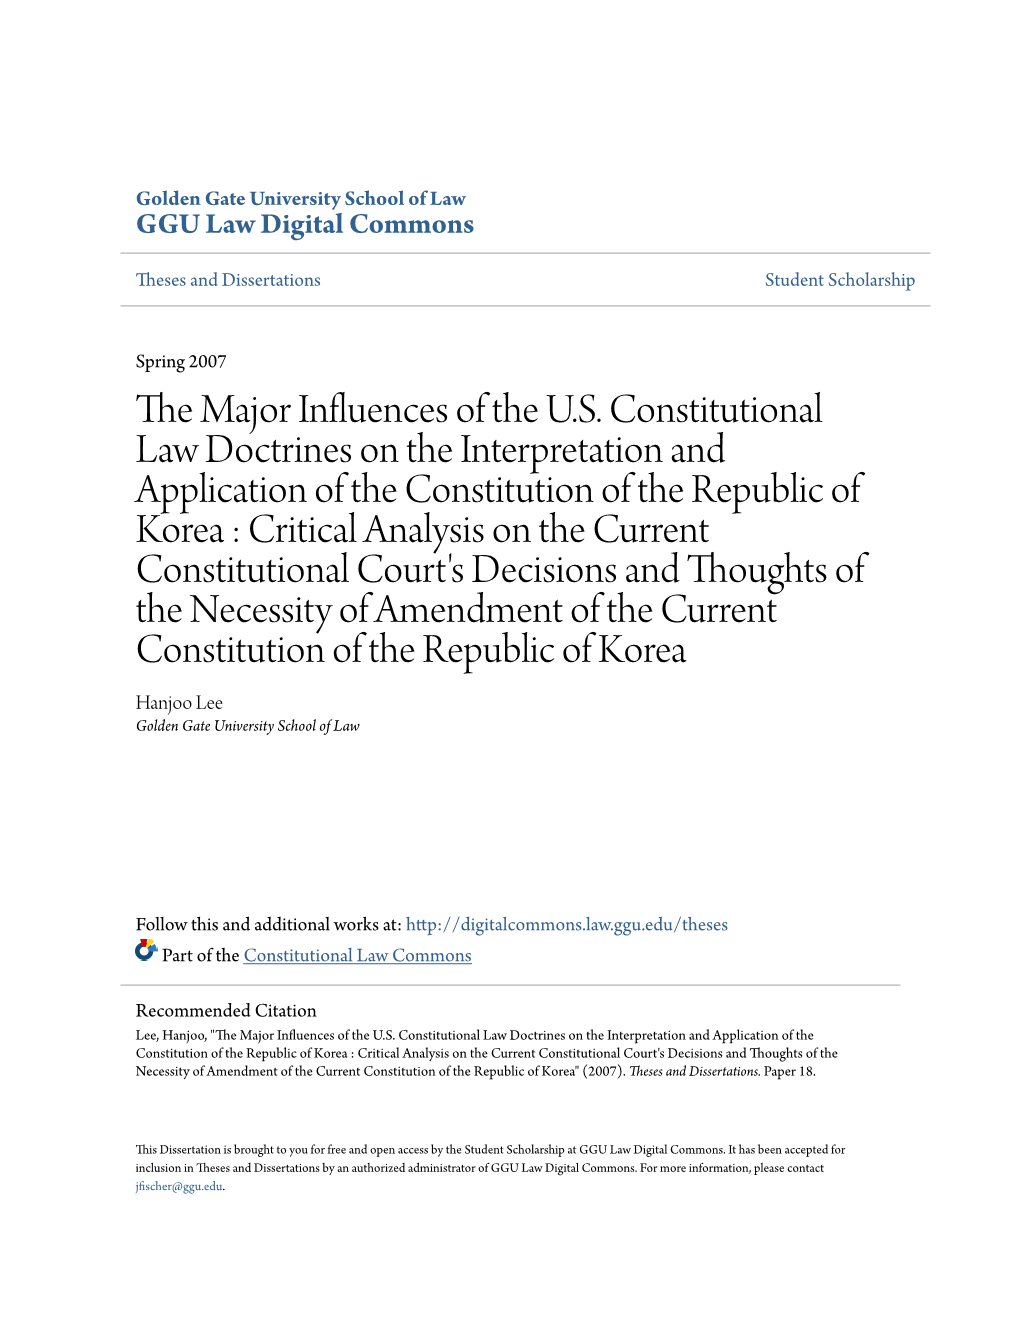 The Major Influences of the U.S. Constitutional Law Doctrines on The